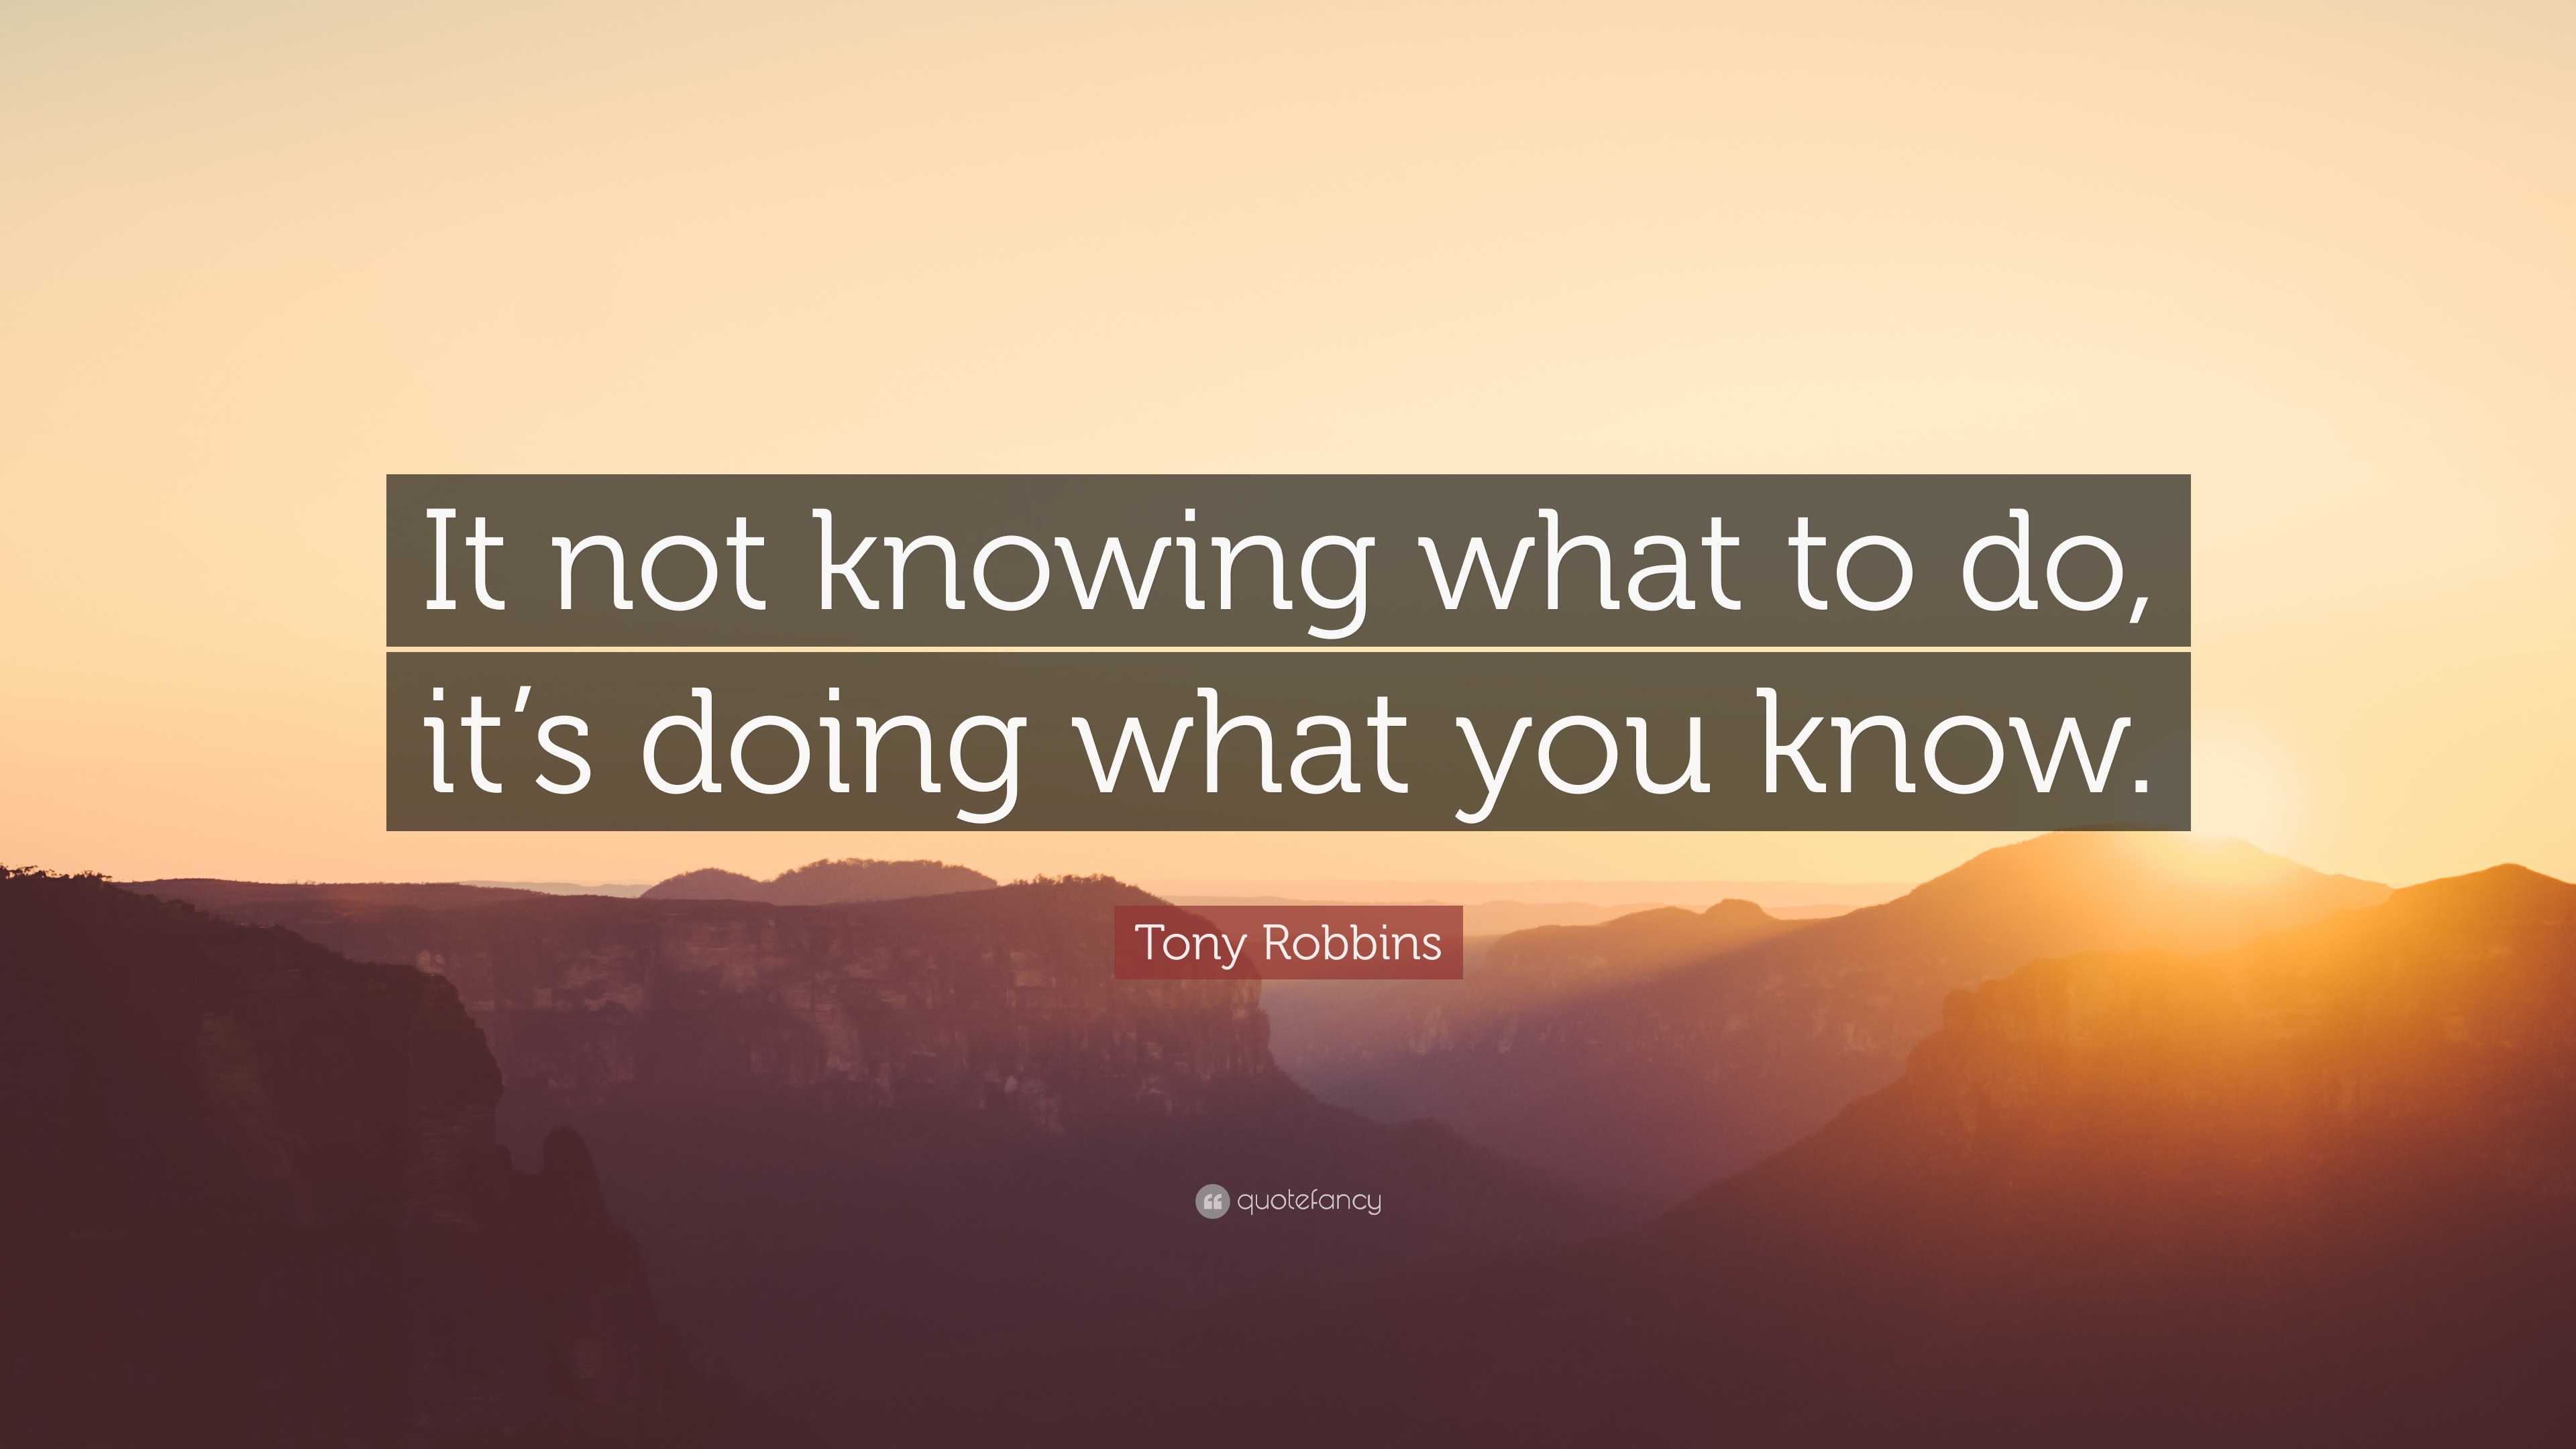 Tony Robbins Quote: “It not knowing what to do, it’s doing what you know.”